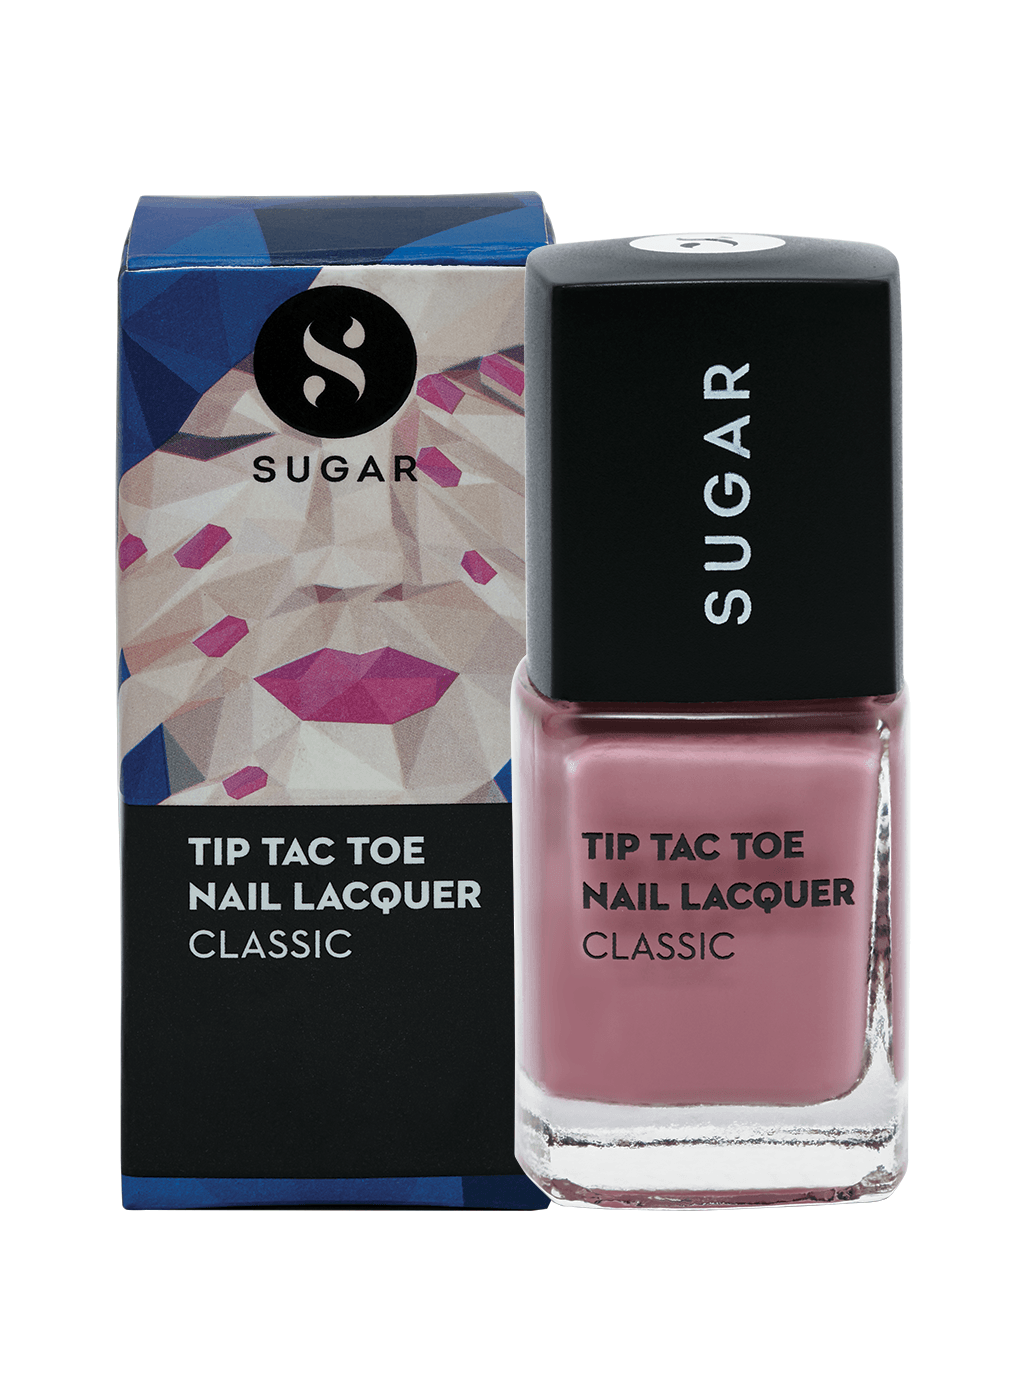 Tip Tac Toe Nail Lacquer - 004 Mauve Mountains (Dusty Pink)